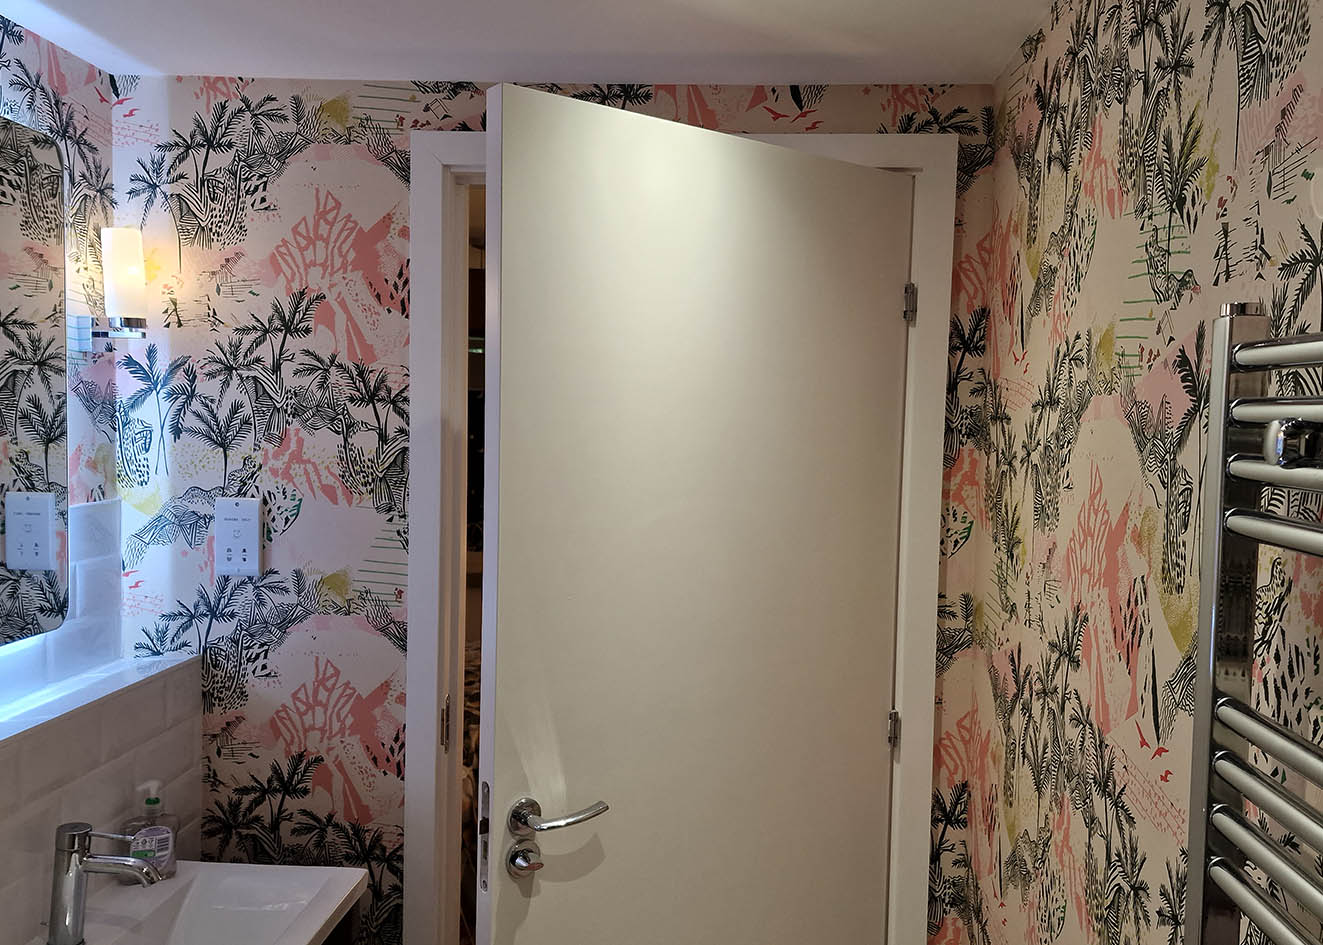 Milton & King Queen Palm wallpaper installed in a bathroom. Green palm trees with pink coloured shapes on white background.